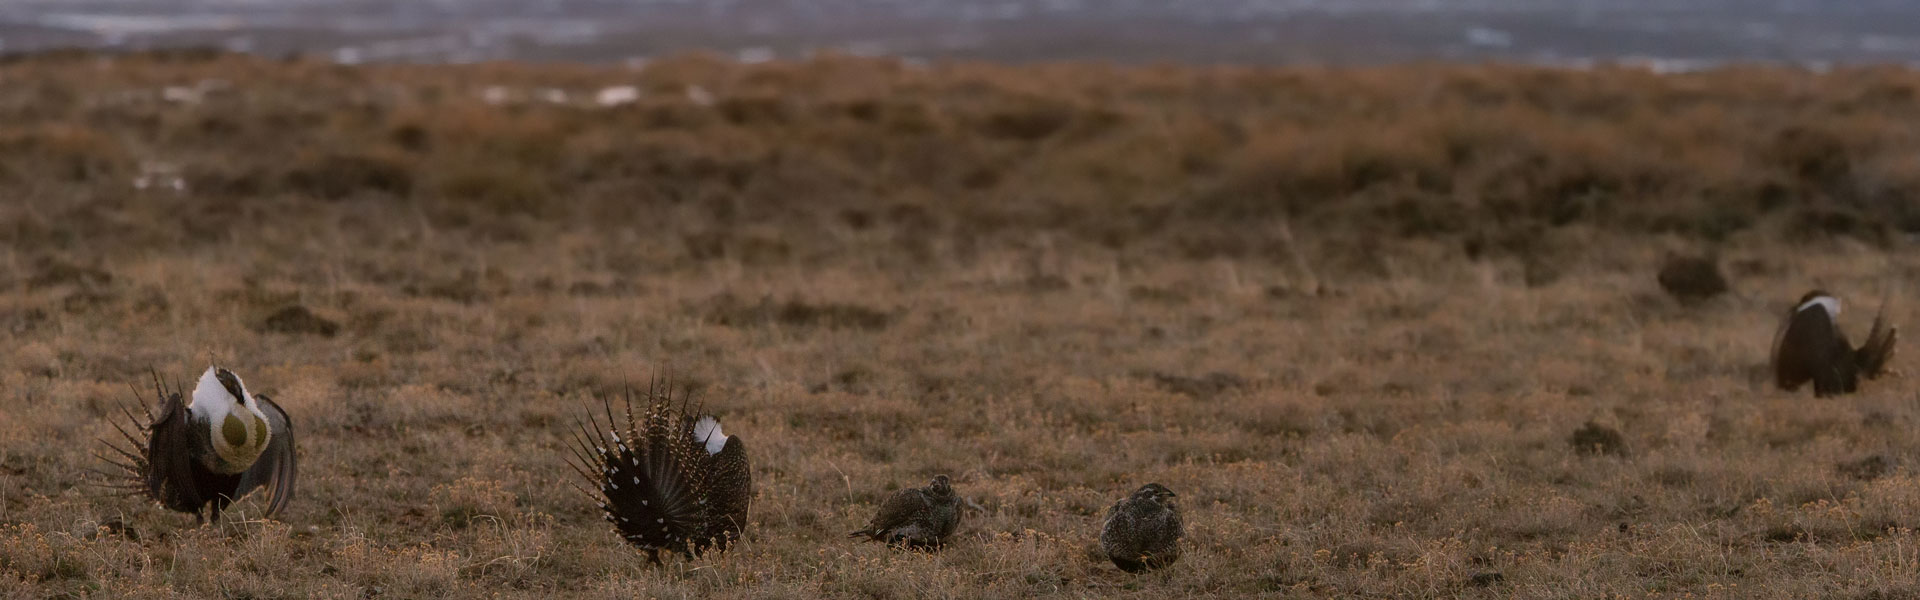 Sage grouse in field